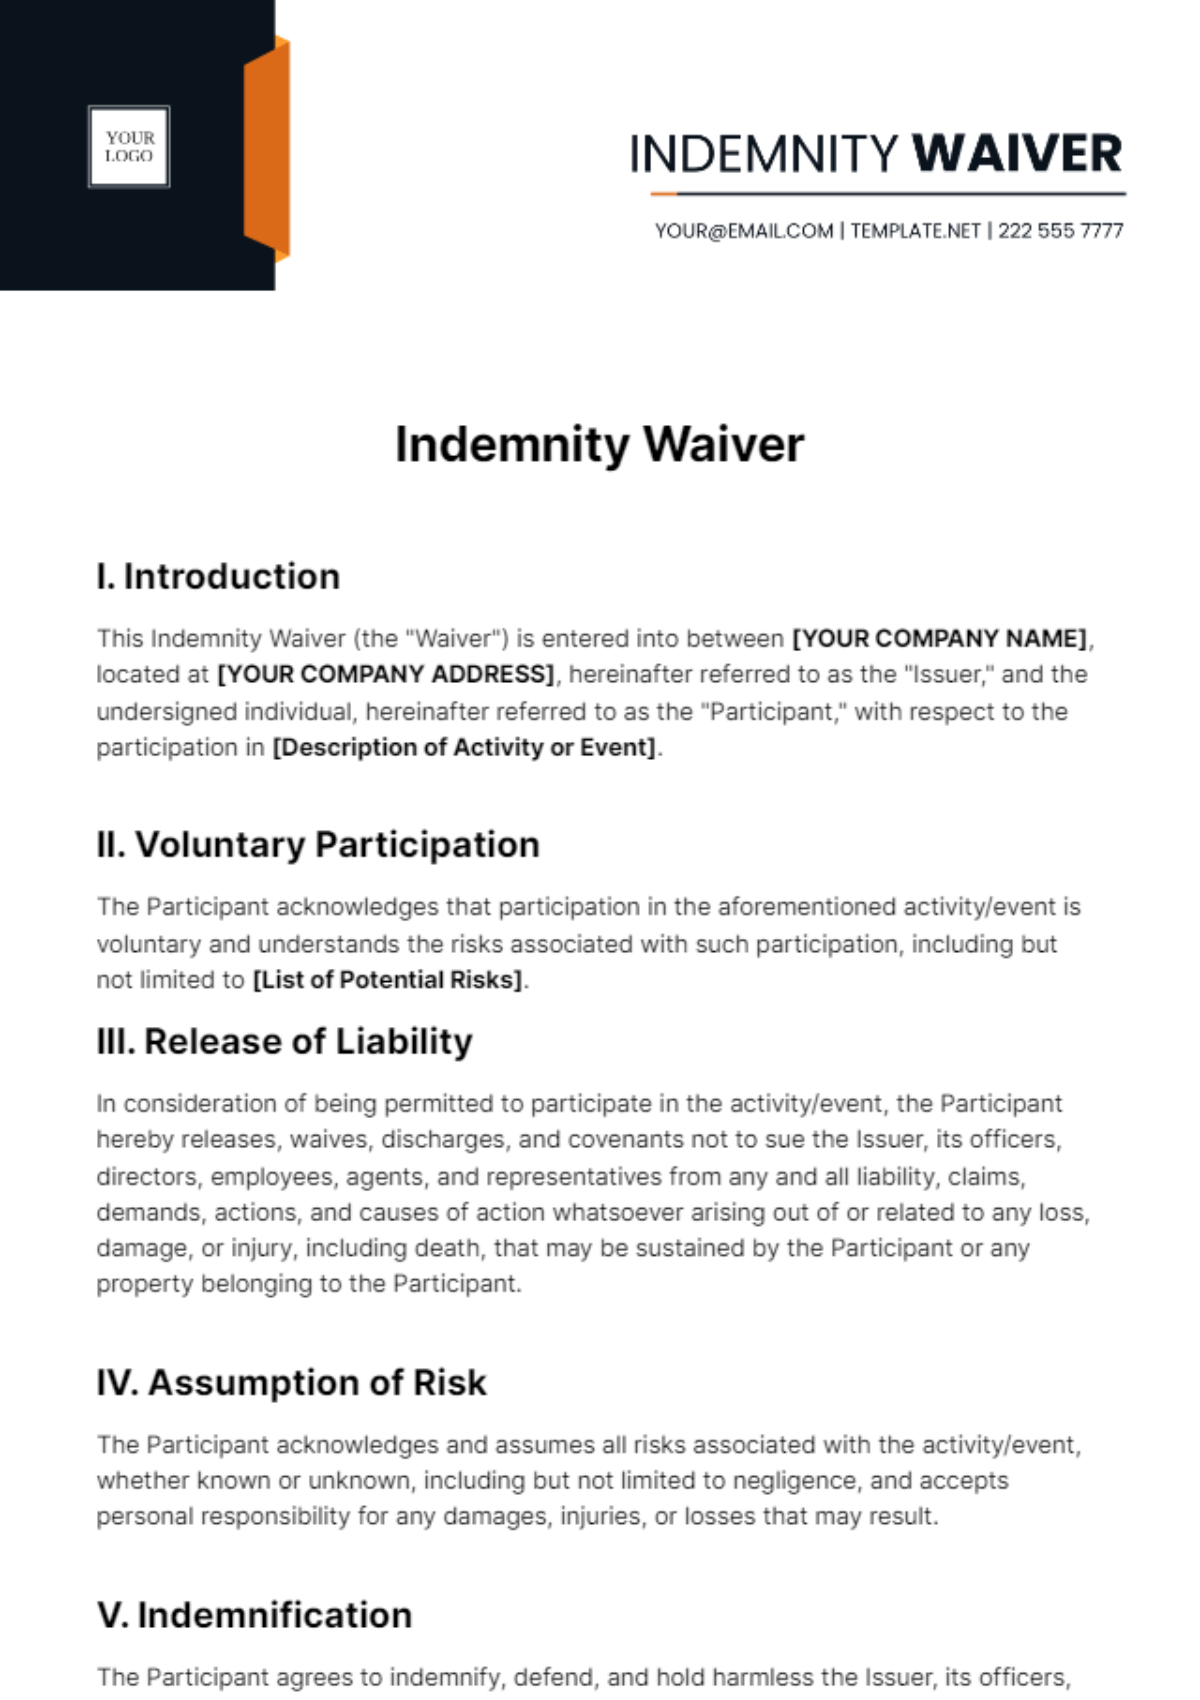 Free Indemnity Waiver Template